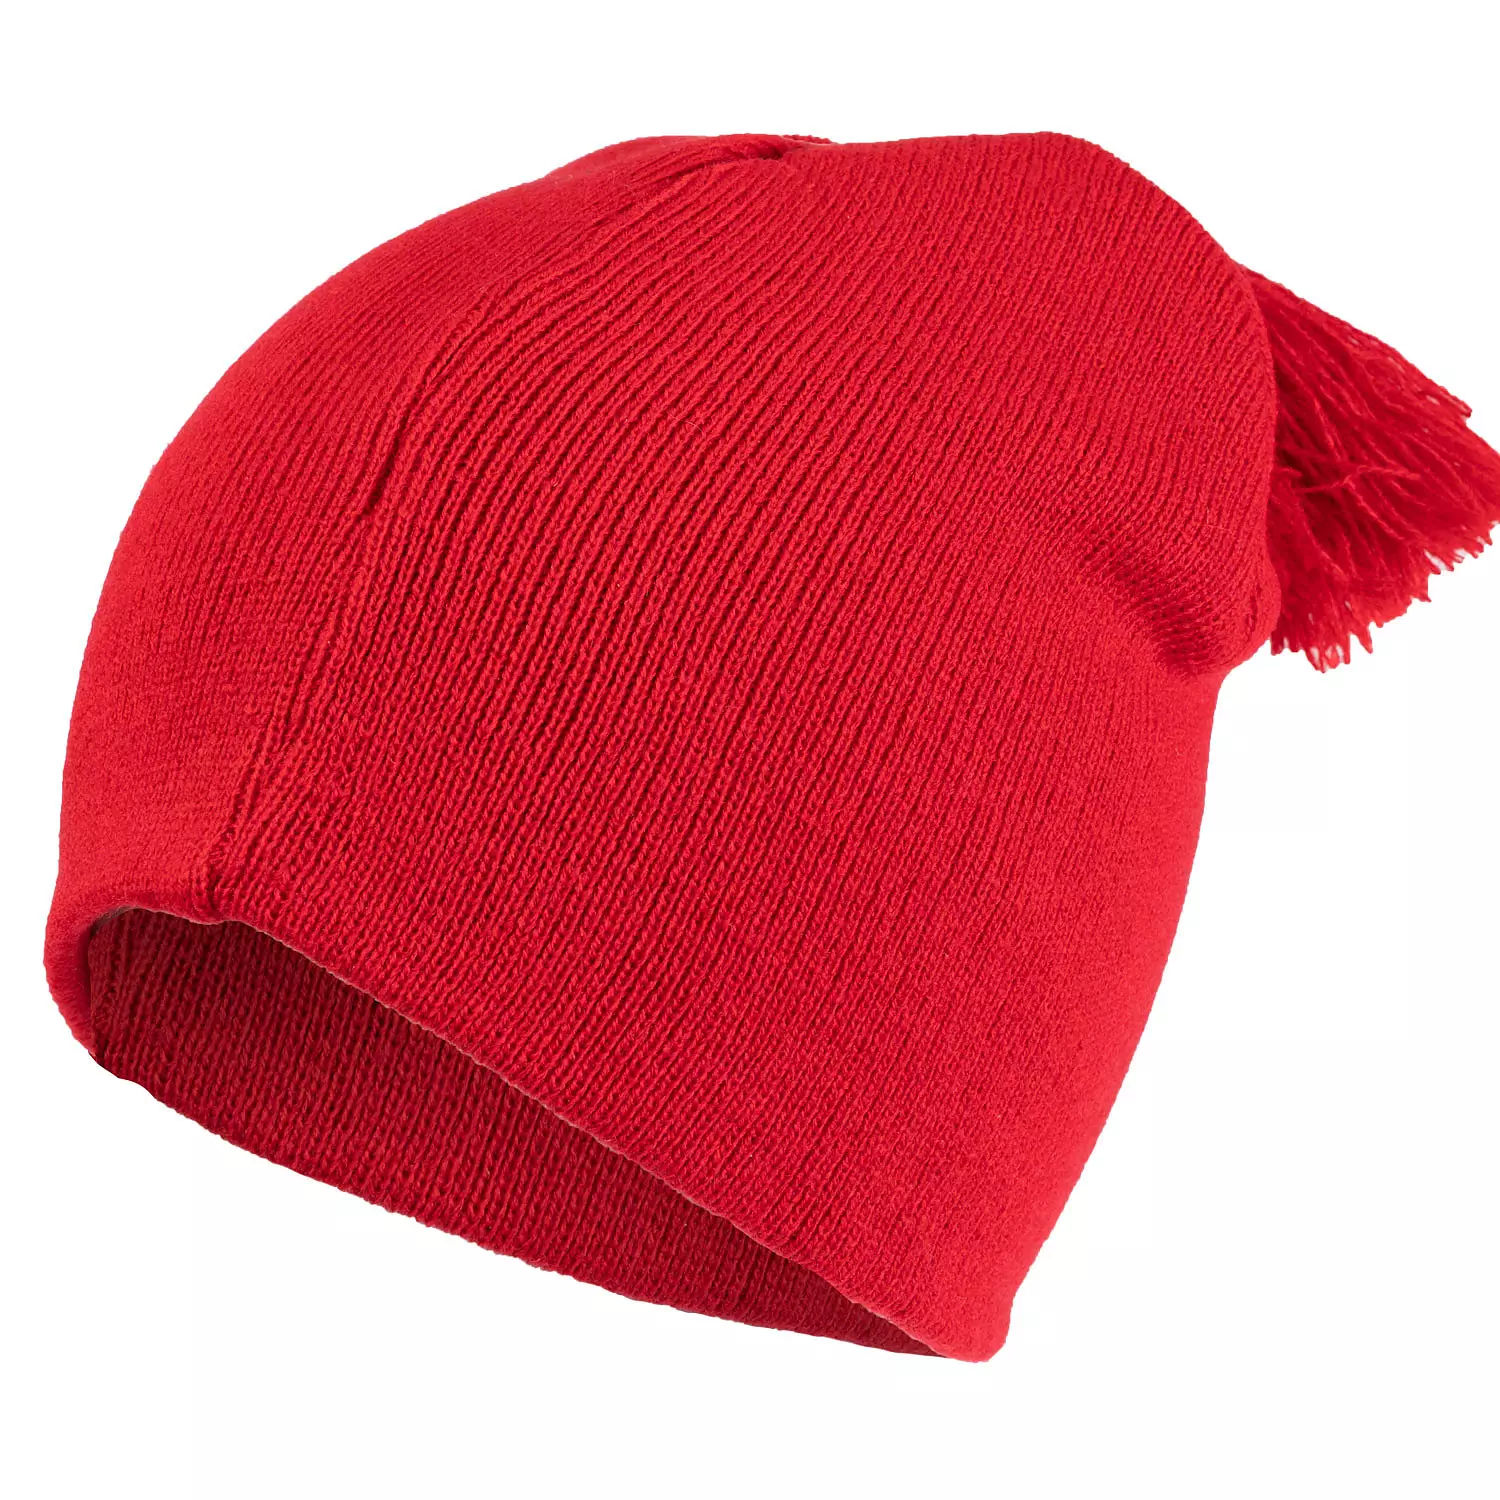 Knit toque with tassle on top, red